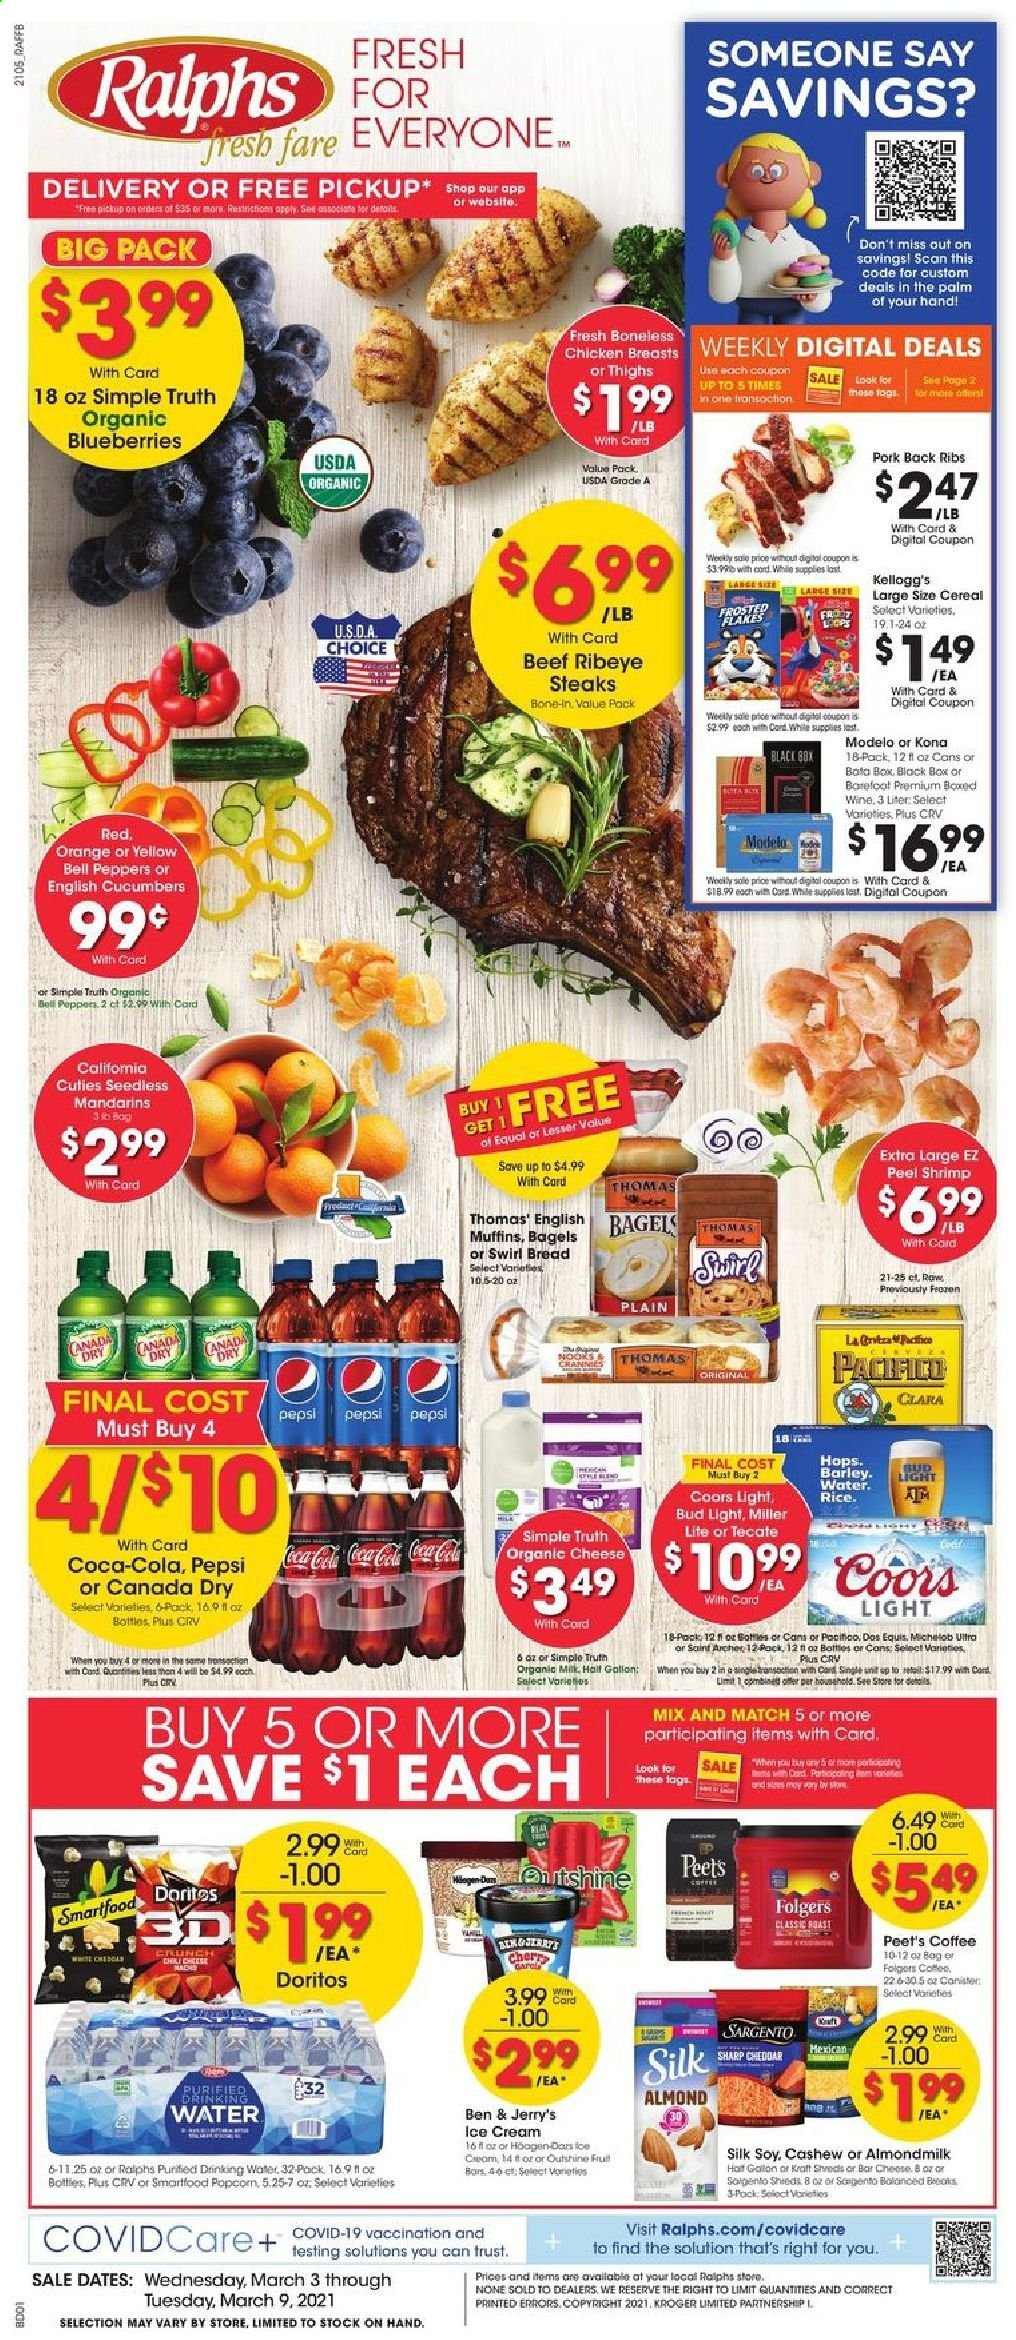 thumbnail - Ralphs Flyer - 03/03/2021 - 03/09/2021 - Sales products - Trust, blueberries, bread, bagels, muffin, oranges, shrimps, cheddar, cheese, Sargento, almond milk, organic milk, Silk, ice cream, Ben & Jerry's, bell peppers, Mars, Kellogg's, Doritos, Smartfood, cucumber, mandarines, cereals, Canada Dry, Coca-Cola, Pepsi, coffee, Folgers, wine, beer, Miller Lite, Coors, Dos Equis, Michelob, Bud Light, Modelo, chicken breasts, beef meat, steak, ribeye steak, pork meat, pork back ribs, Sharp. Page 1.